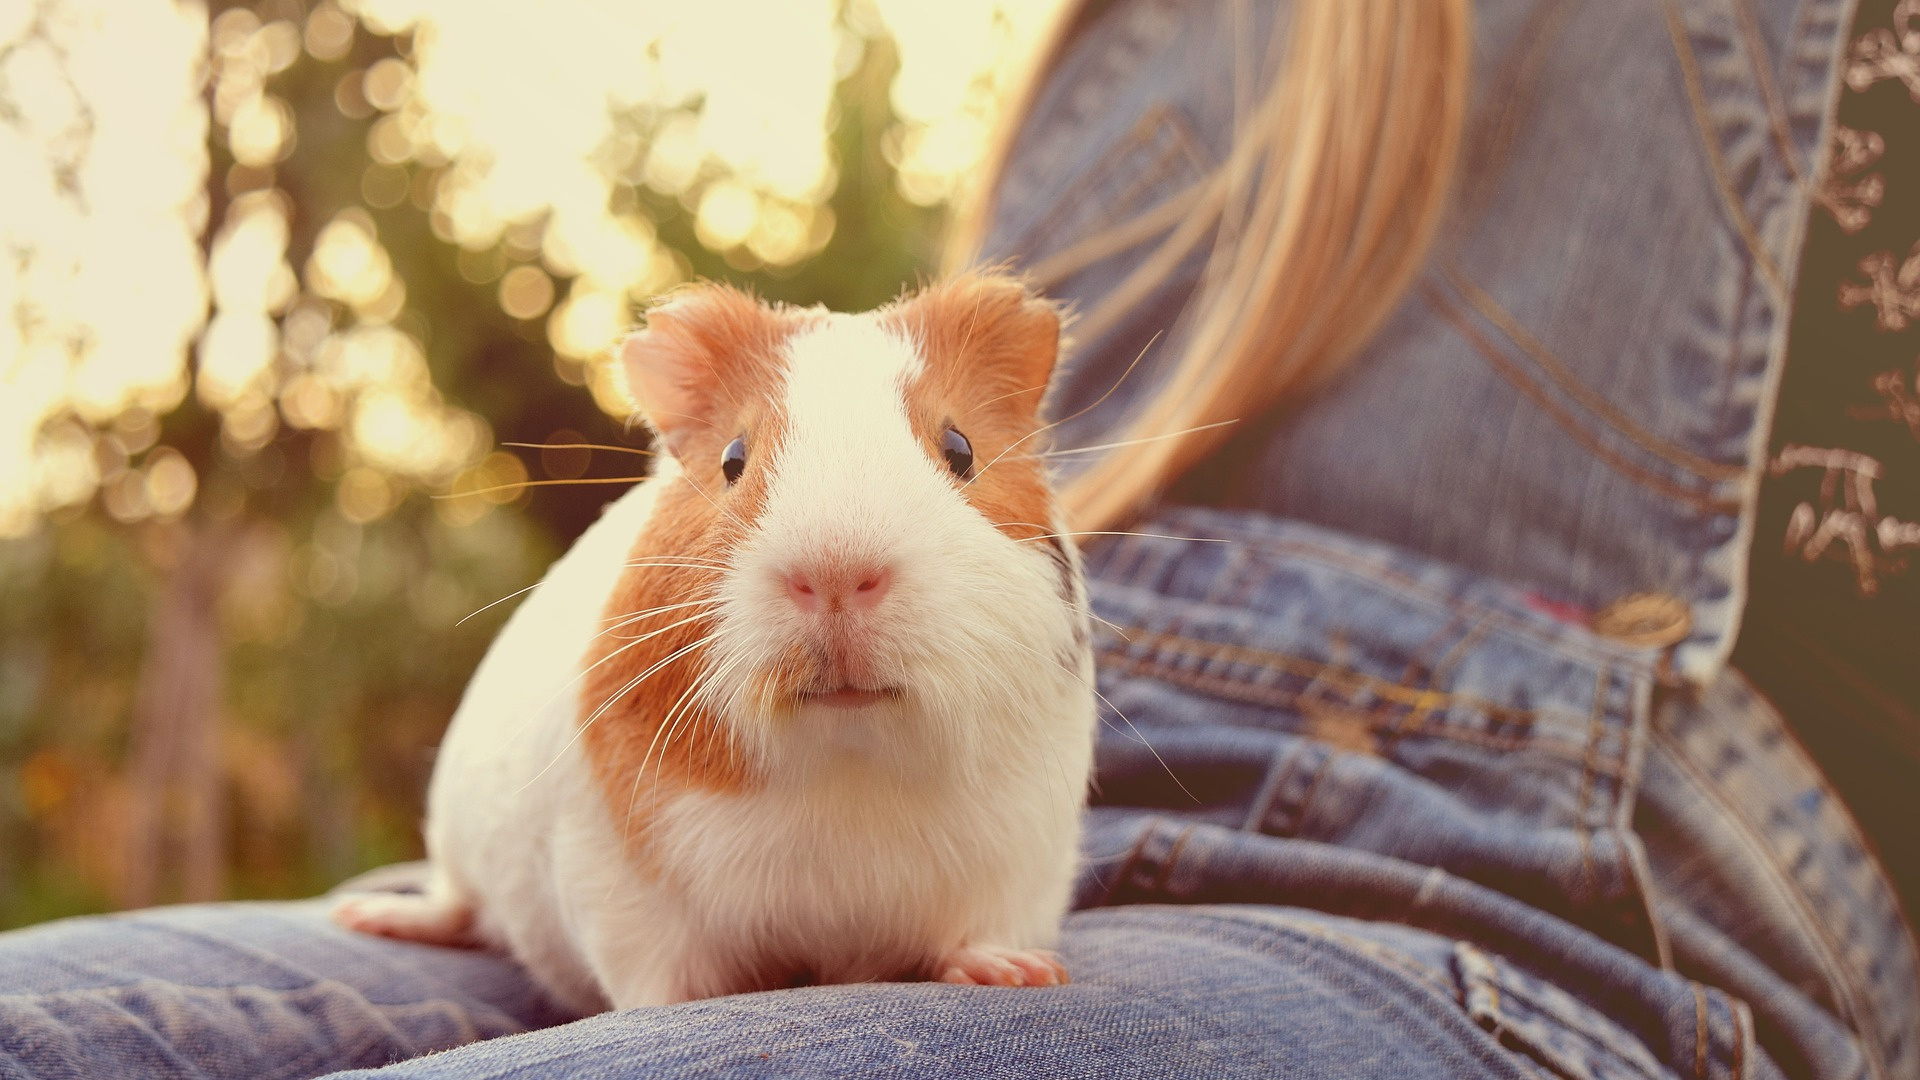 White and Brown Guinea Pig on Blue Denim Jeans. Wallpaper in 1920x1080 Resolution